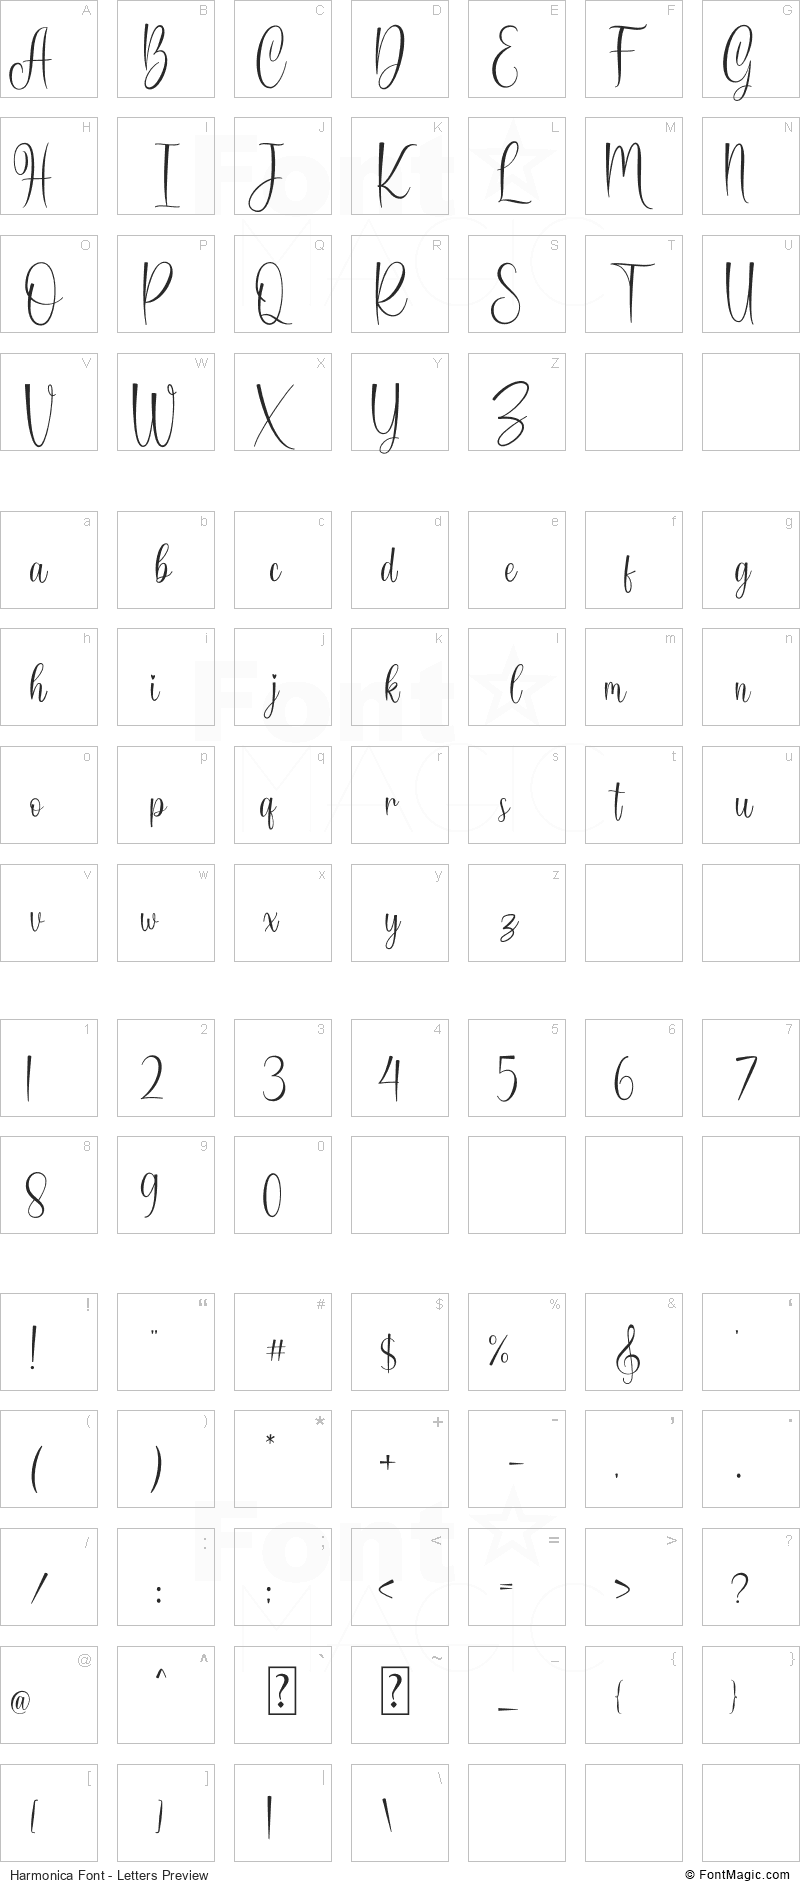 Harmonica Font - All Latters Preview Chart